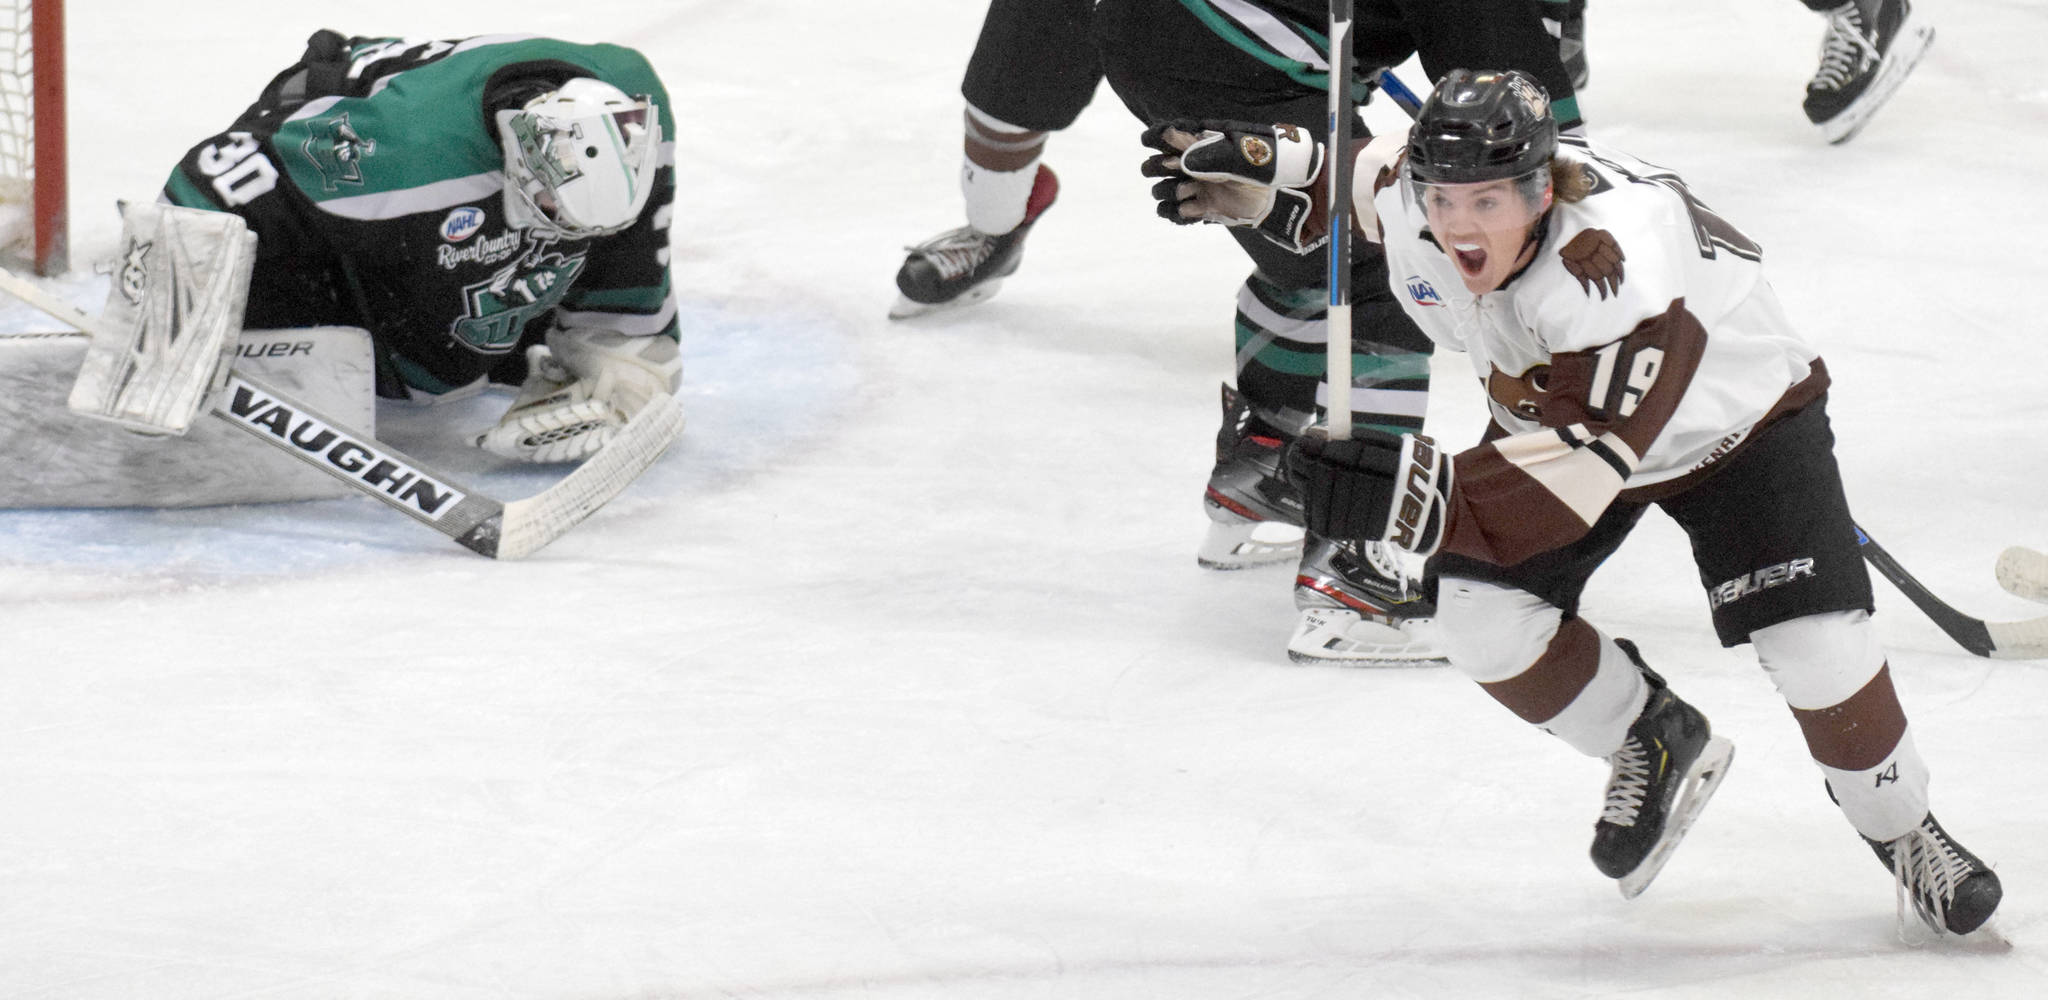 Kenai River Brown Bears forward Cody Moline celebrates his goal in the first period against the Chippewa (Wisconsin) Steel on Friday at the Soldotna Regional Sports Complex in Soldotna. (Photo by Jeff Helminiak/Peninsula Clarion)